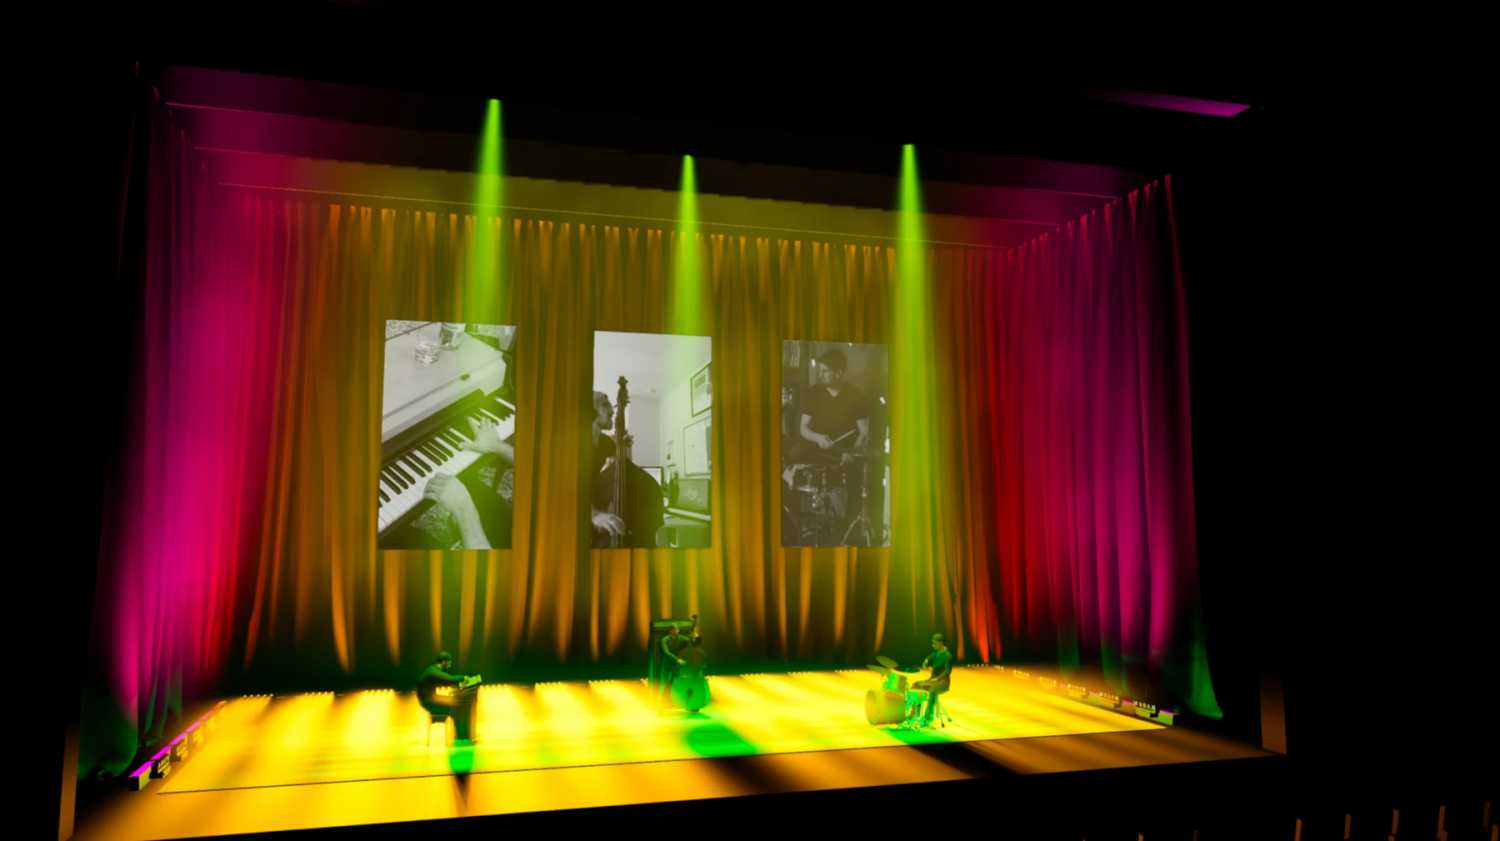 Andrew Cass of C2 Design & Drafting created the virtual show, supporting the band with immersive looks